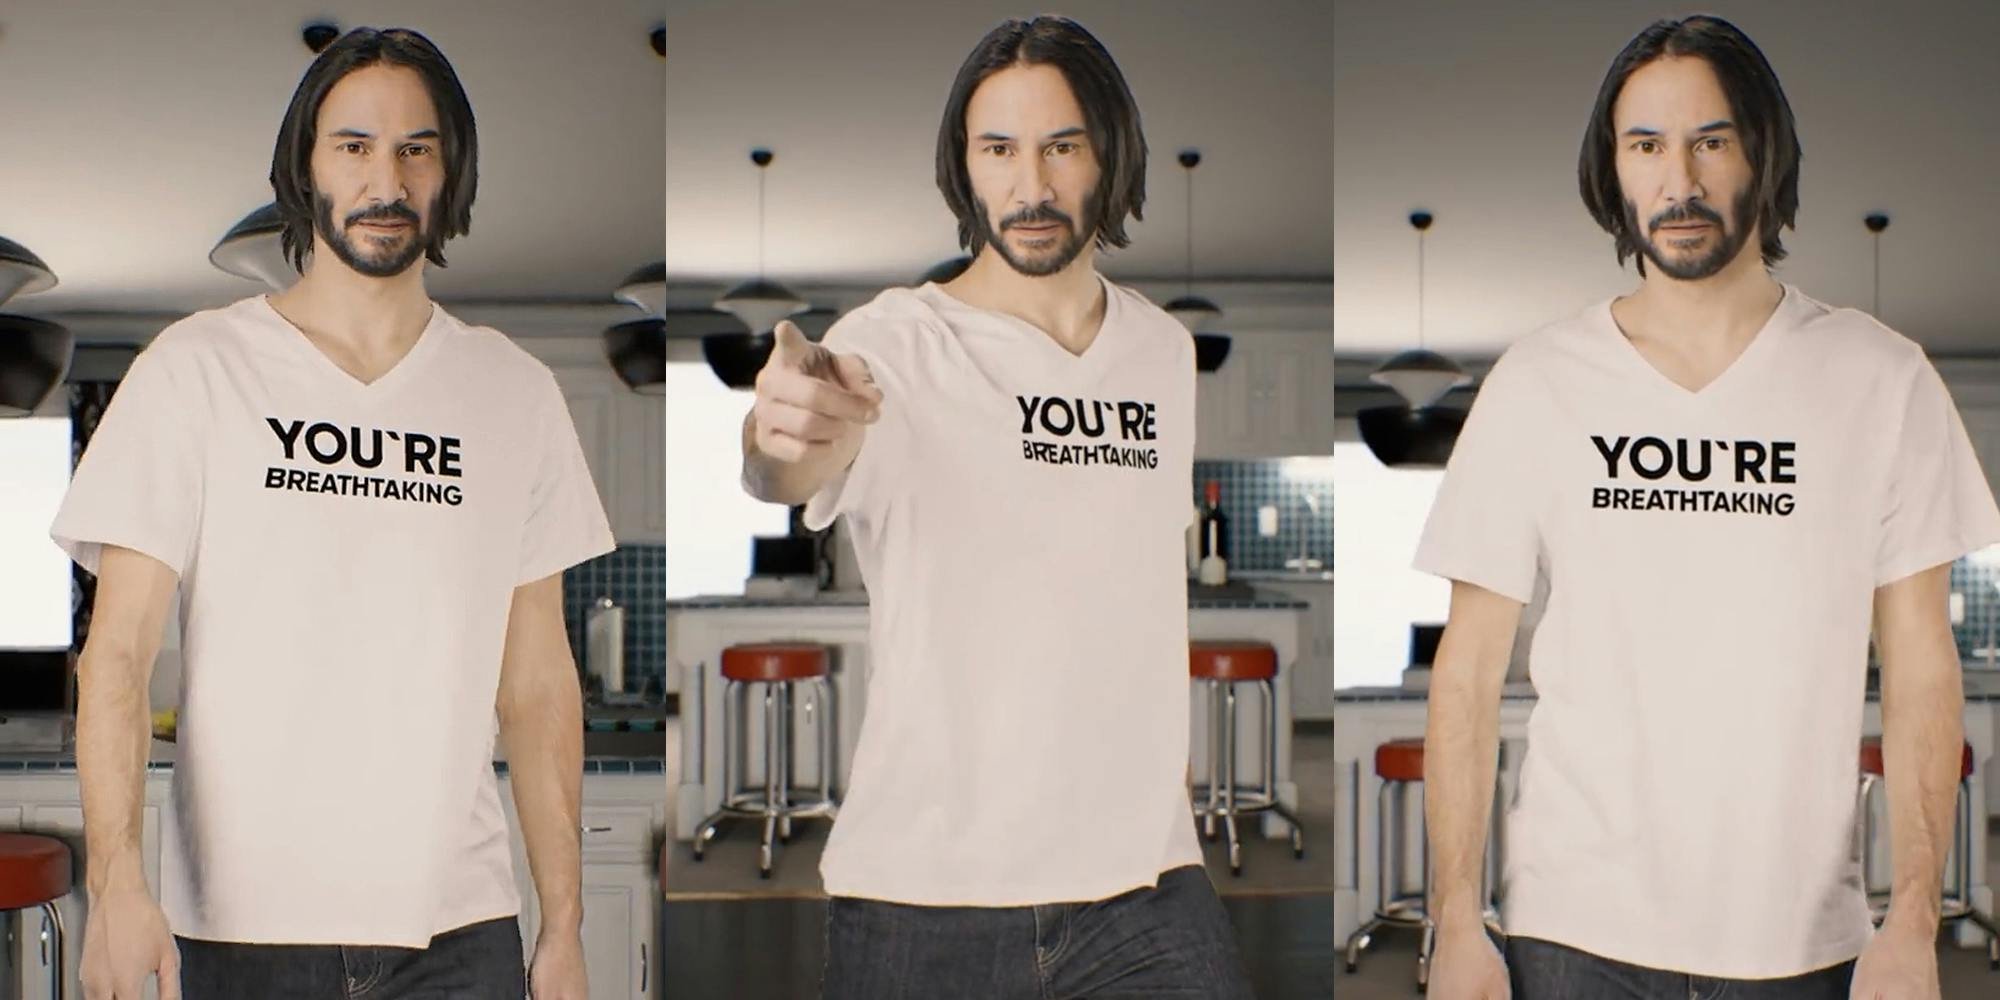 Don't fall for this Keanu Reeves deepfake on TikTok like millions of others already have